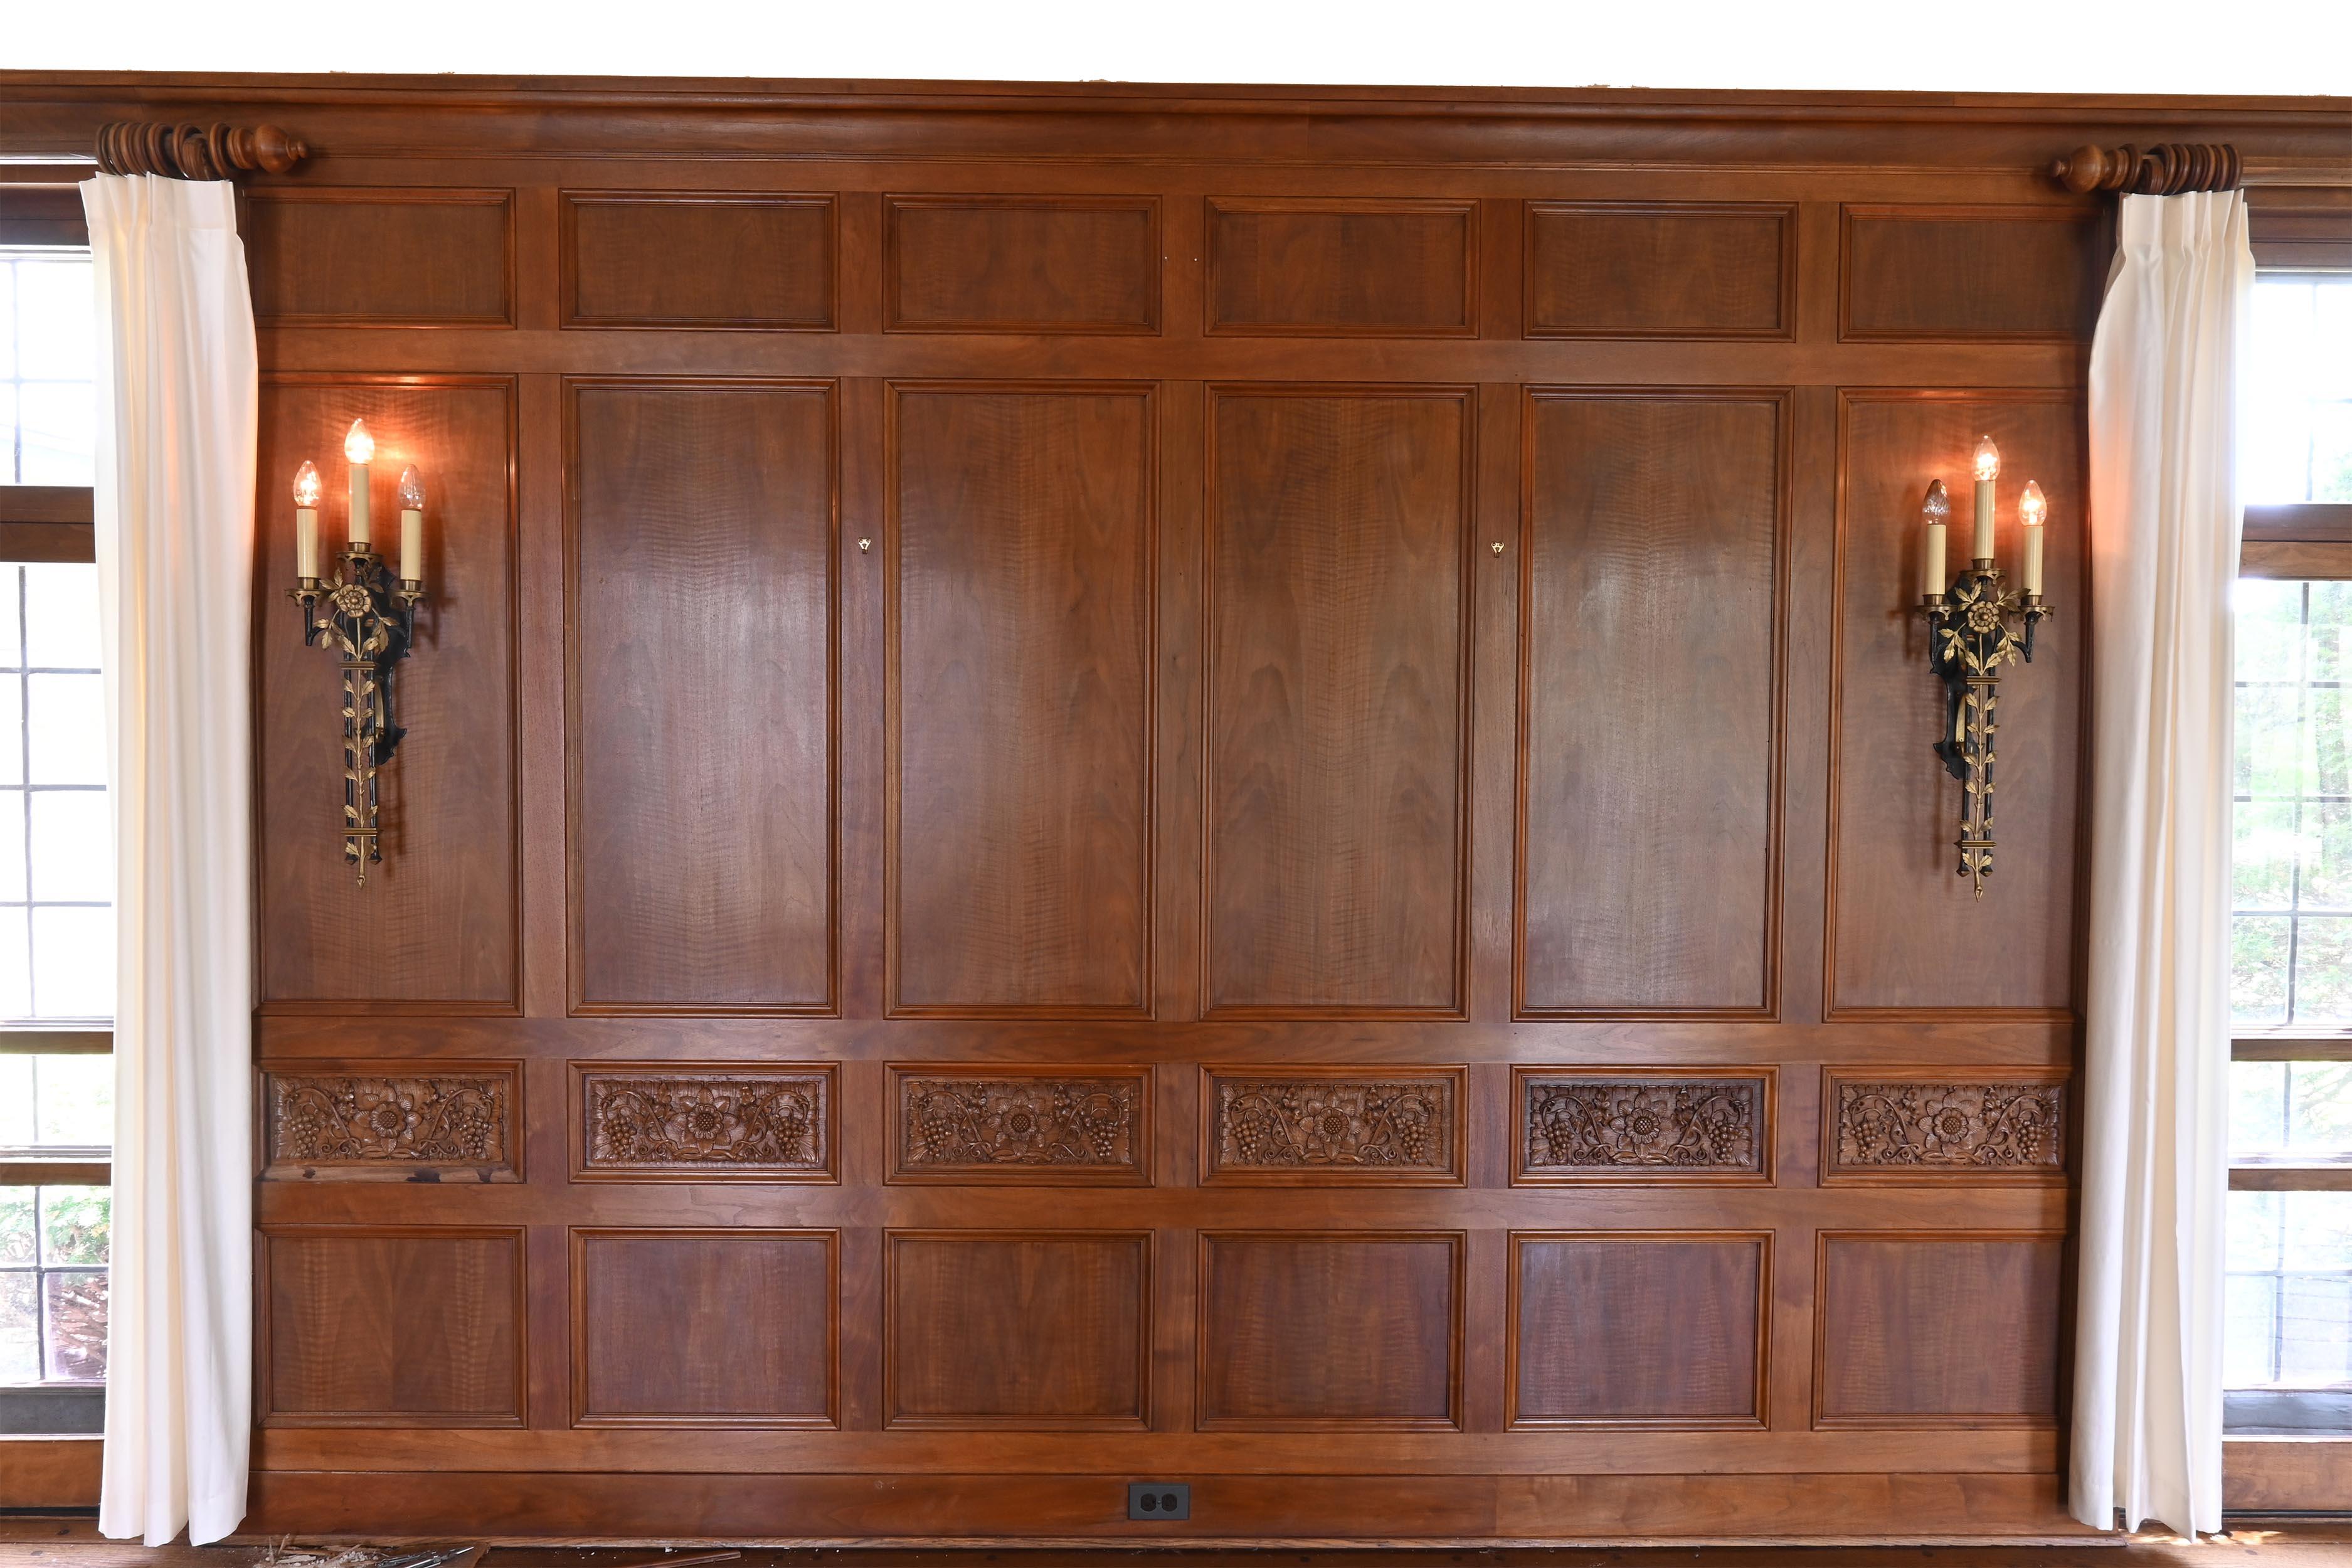 Walnut 1929 Paneled Complete Great Room Carved with Mantle & 4 French Doors & All Original Fixtures Included
 
AA# 61251

Circa: Deconstructed from a 1929 Minneapolis Lake Home
Condition: Pristine Age Consistent Wear, Meticulously Deconstructed